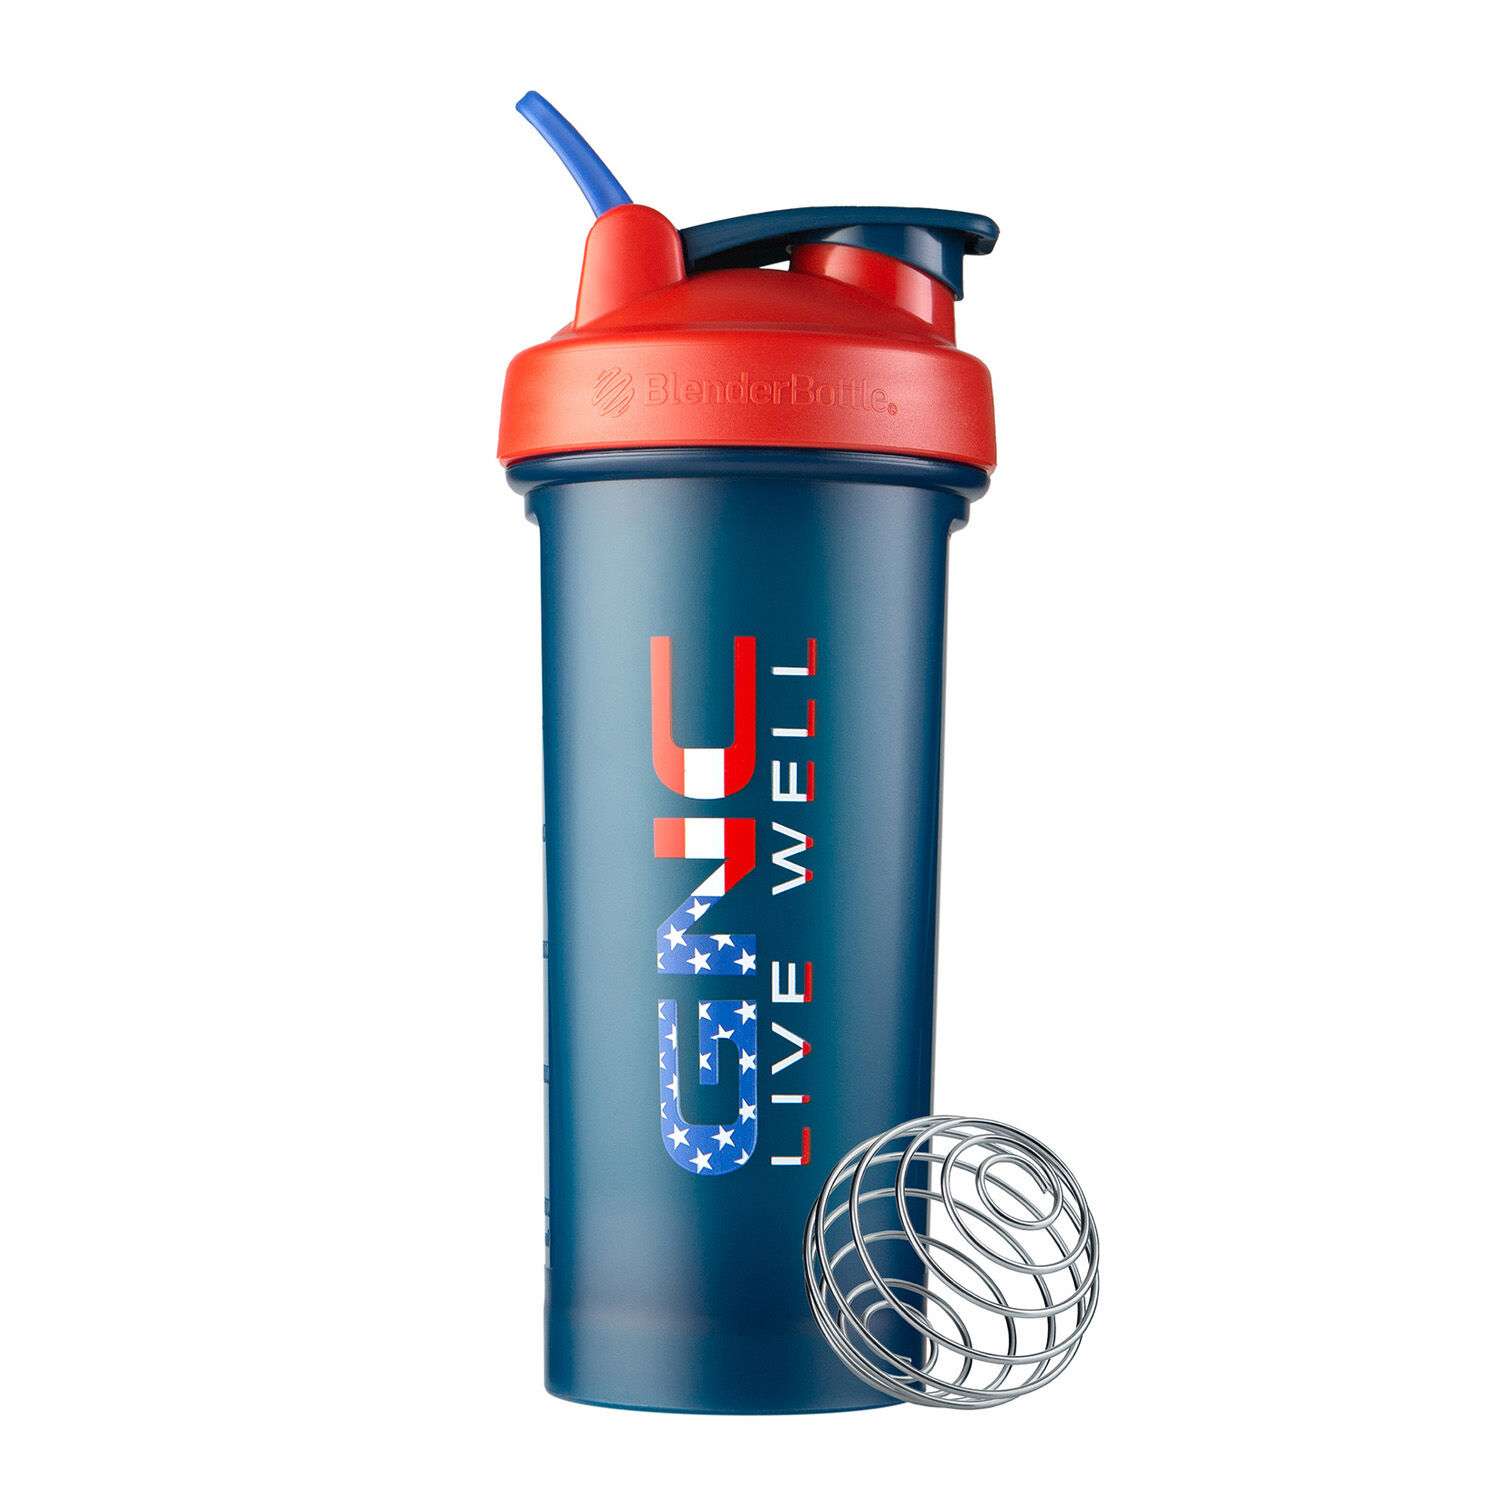  G Fuel Hype Sauce Shaker Bottle, Drink Mixer for Pre Workout,  Protein Shake, Smoothie Mix, Meal Replacement Shakes, Energy Powder and  More, Blender Cup, Portable Safe, BPA Free Plastic - 16